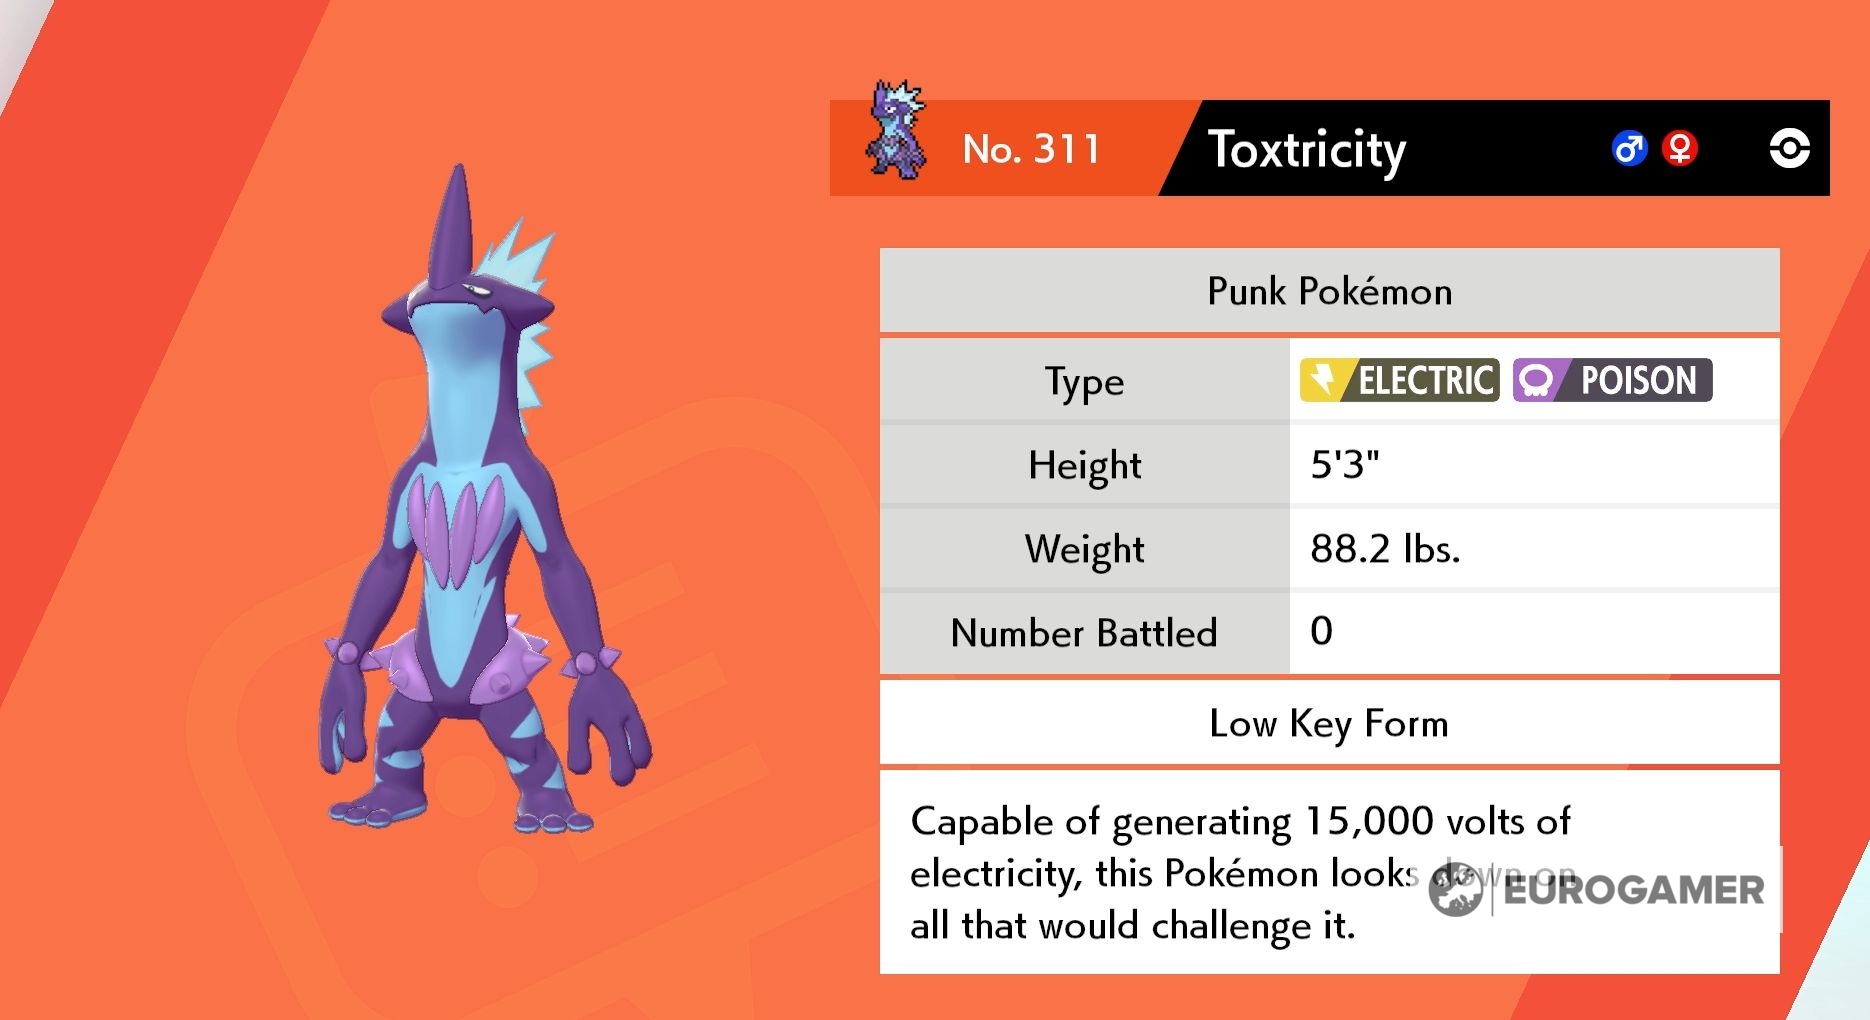 Pokémon Sword and Shield Toxel evolution method how to evolve Toxel into Toxtricity with Low Key Form and Amped Form explained